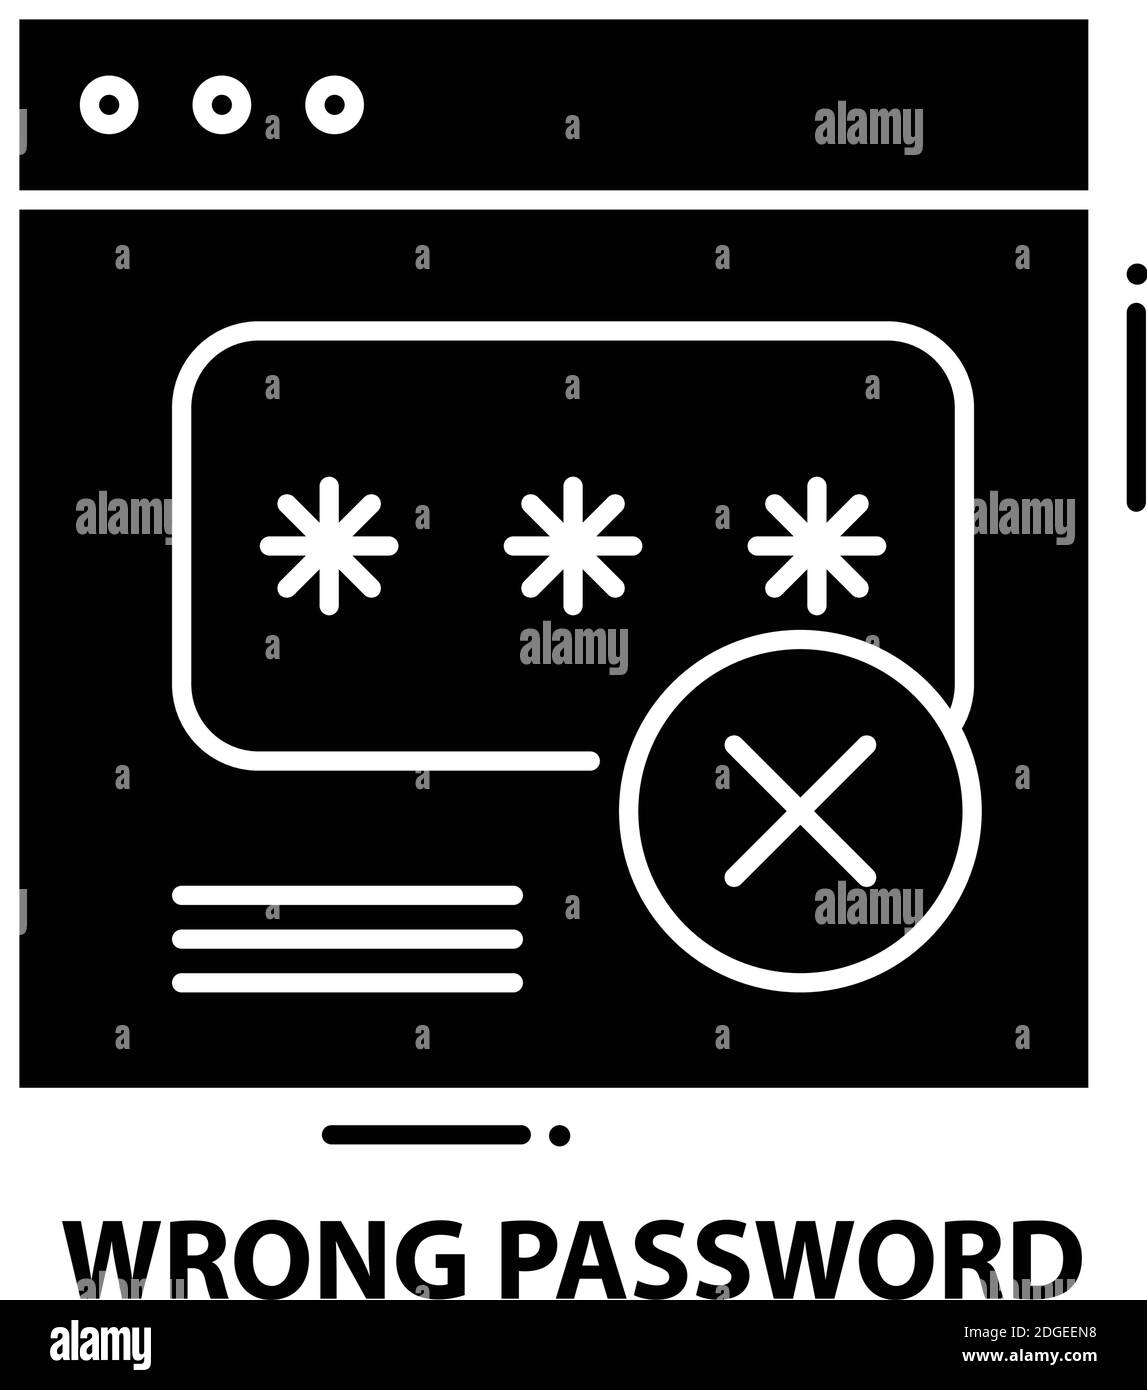 wrong password icon, black vector sign with editable strokes, concept illustration Stock Vector